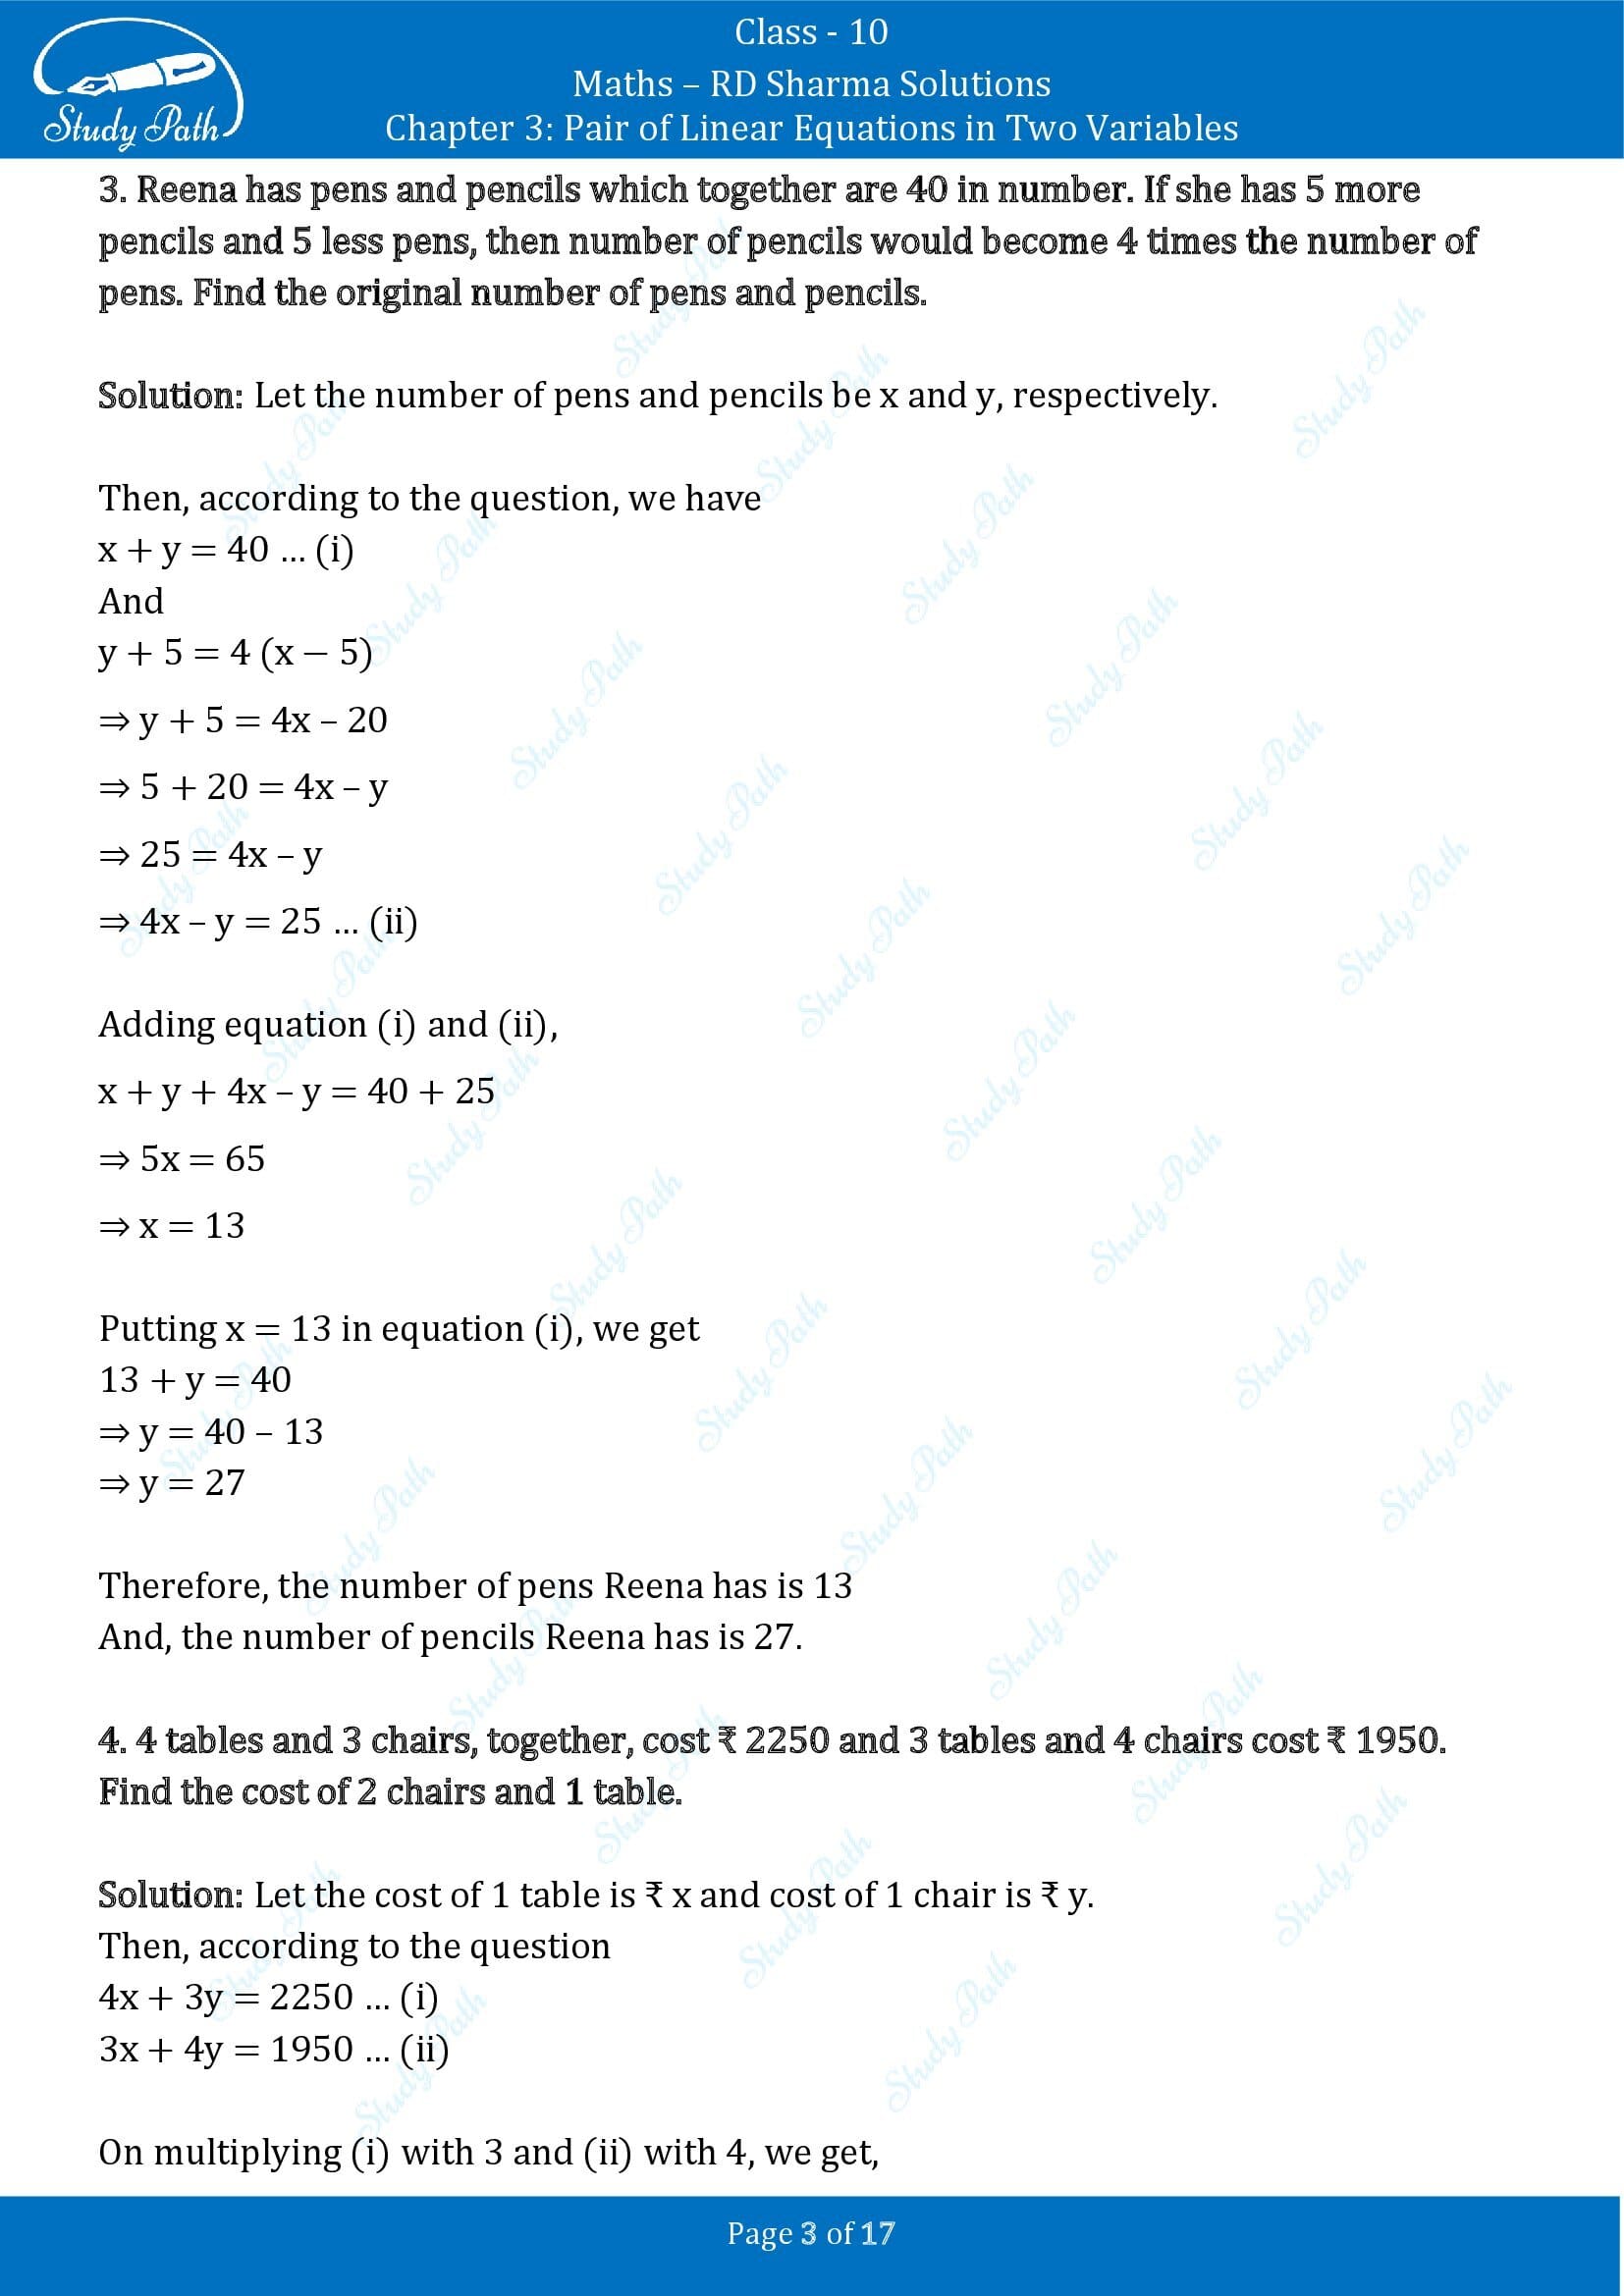 RD Sharma Solutions Class 10 Chapter 3 Pair of Linear Equations in Two Variables Exercise 3.6 00003